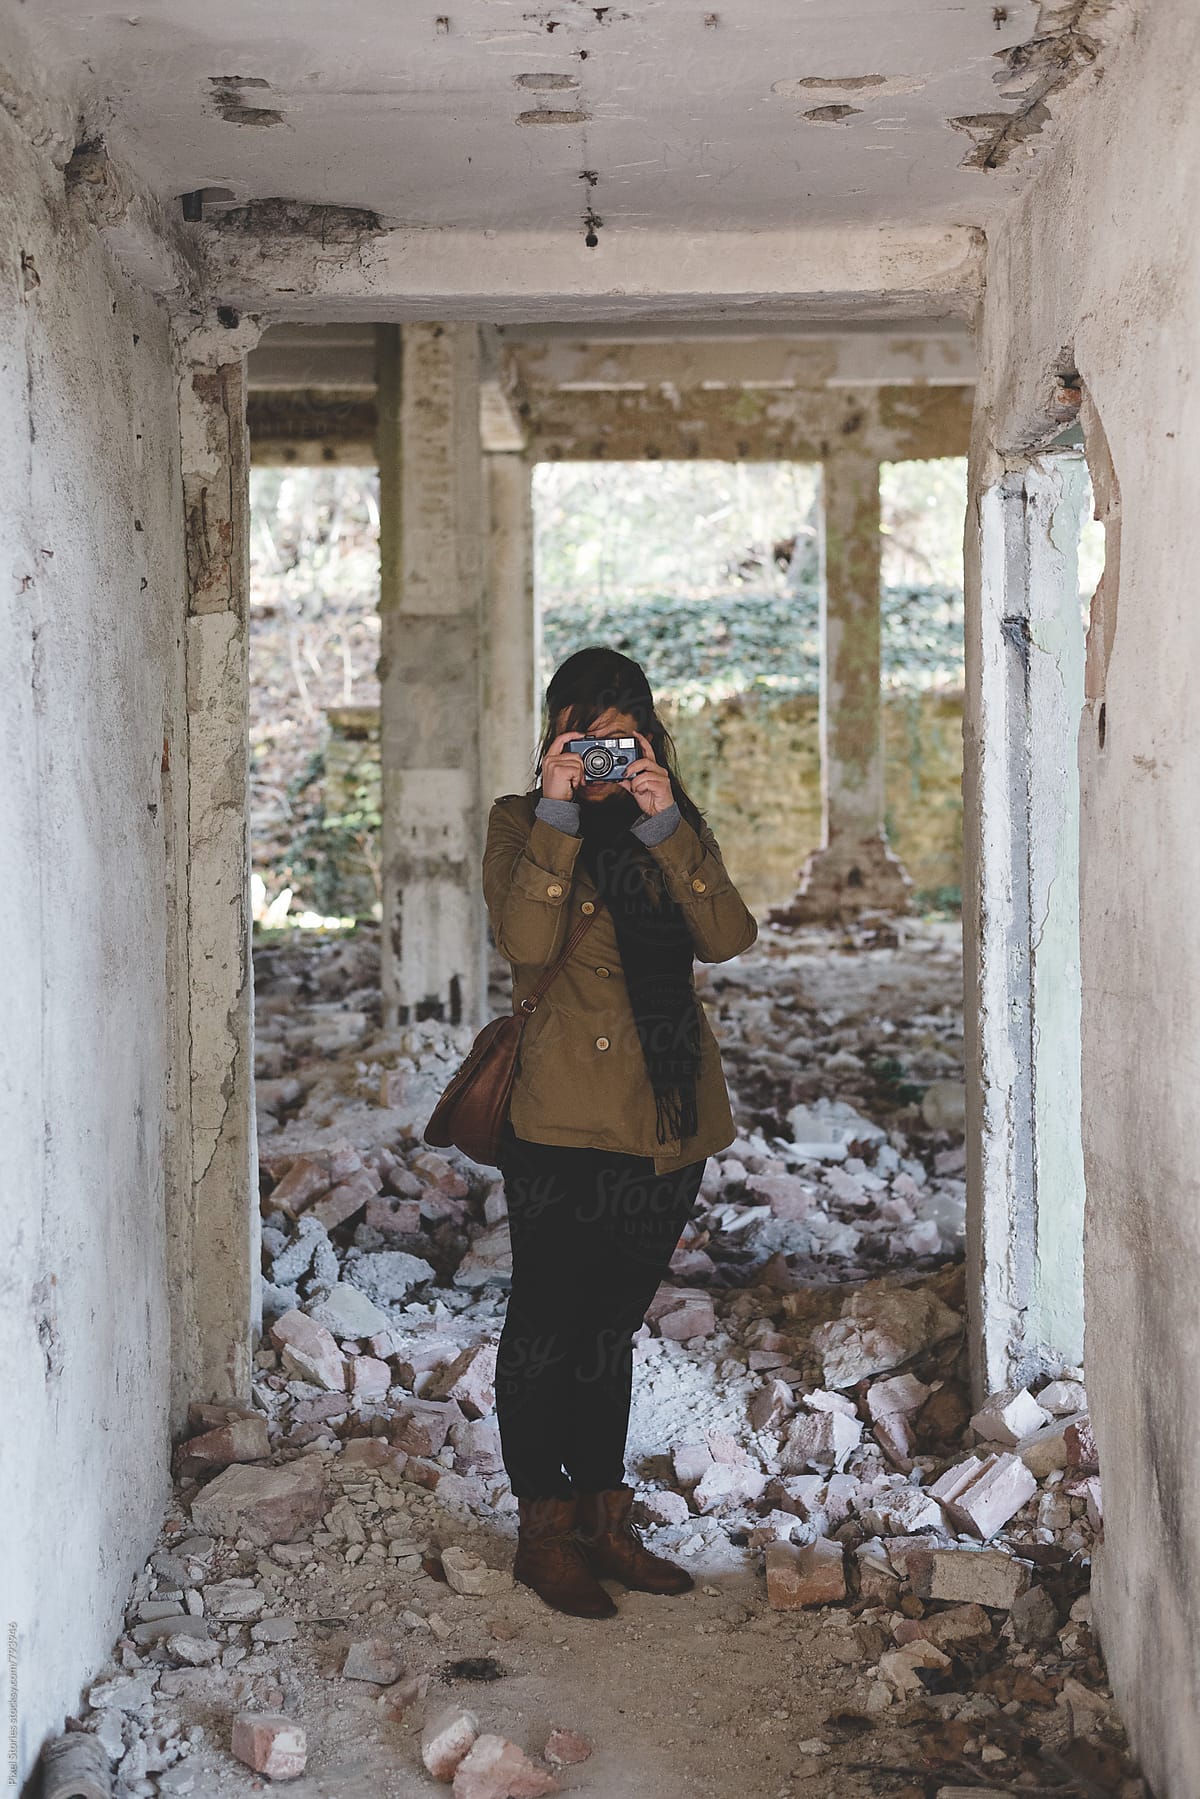 Young woman urban exploring an old building with her camera